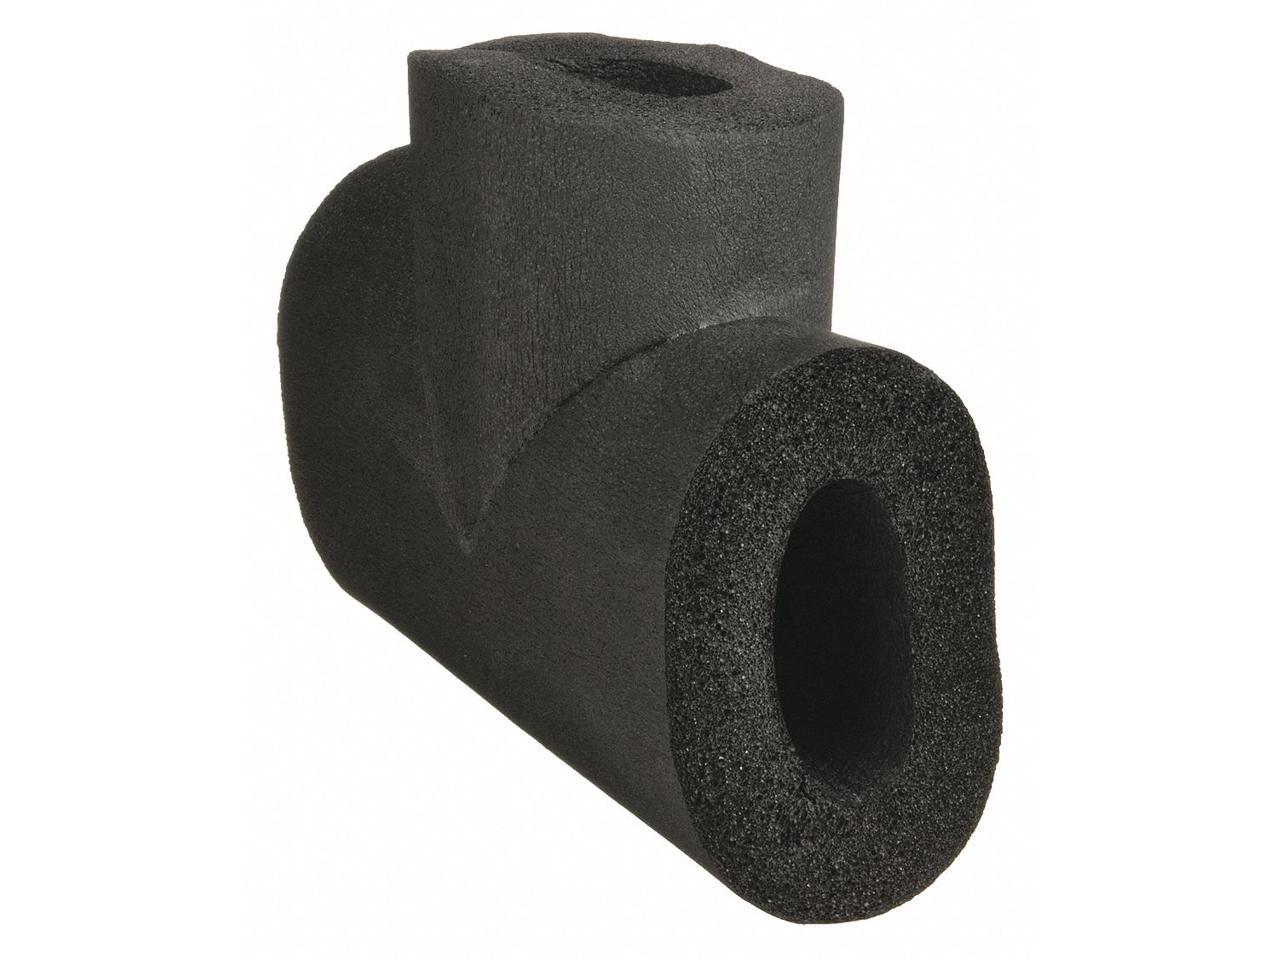 K-FLEX USA Pipe Fitting Insulation,Tee,7/8 In ID 801-T-100078 